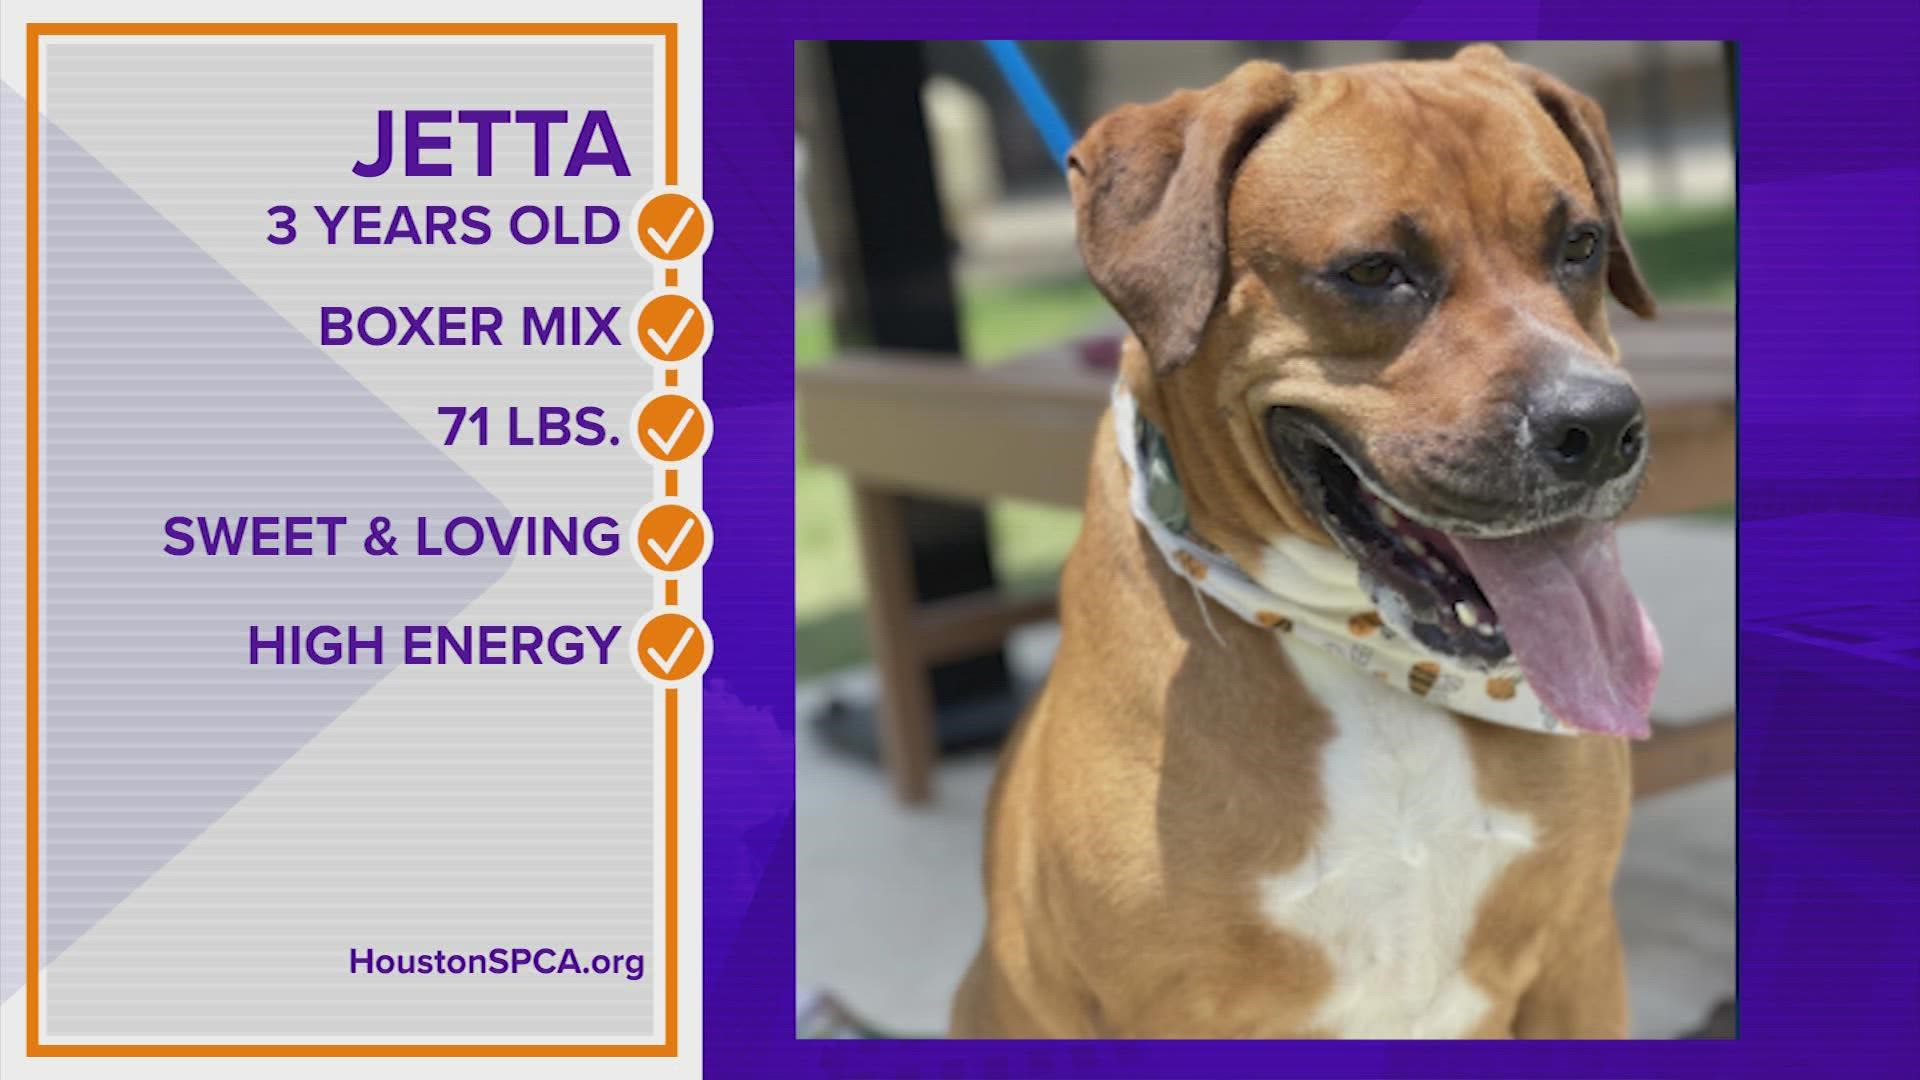 Meet Jetta! She is a 3-year-old boxer mix now available for adoption.